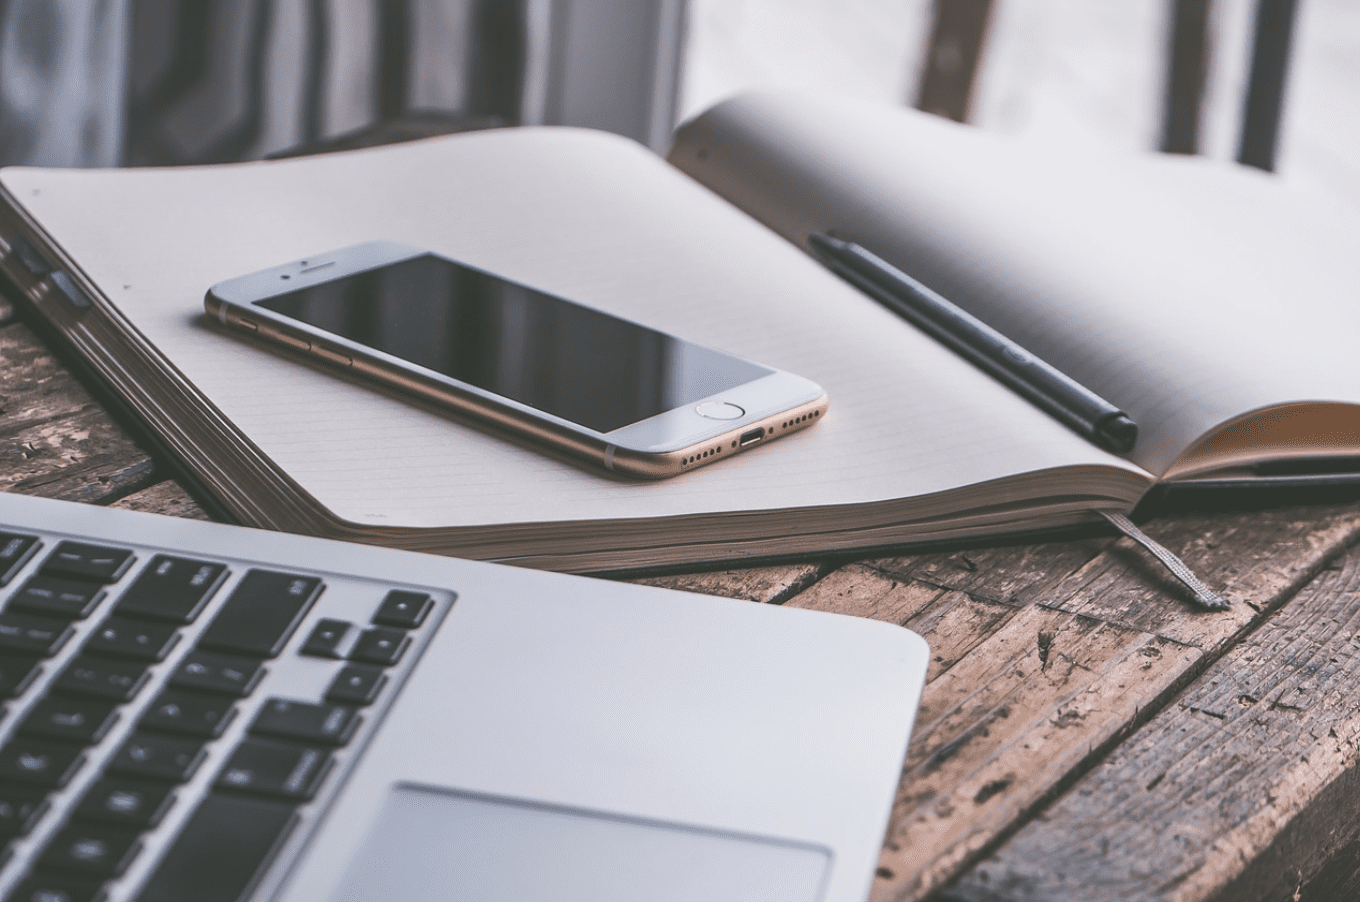 Laptop next to a smartphone sitting on top of an open notebook with a pen, all on a wooden table; image by 6689062, via Pixabay.com.